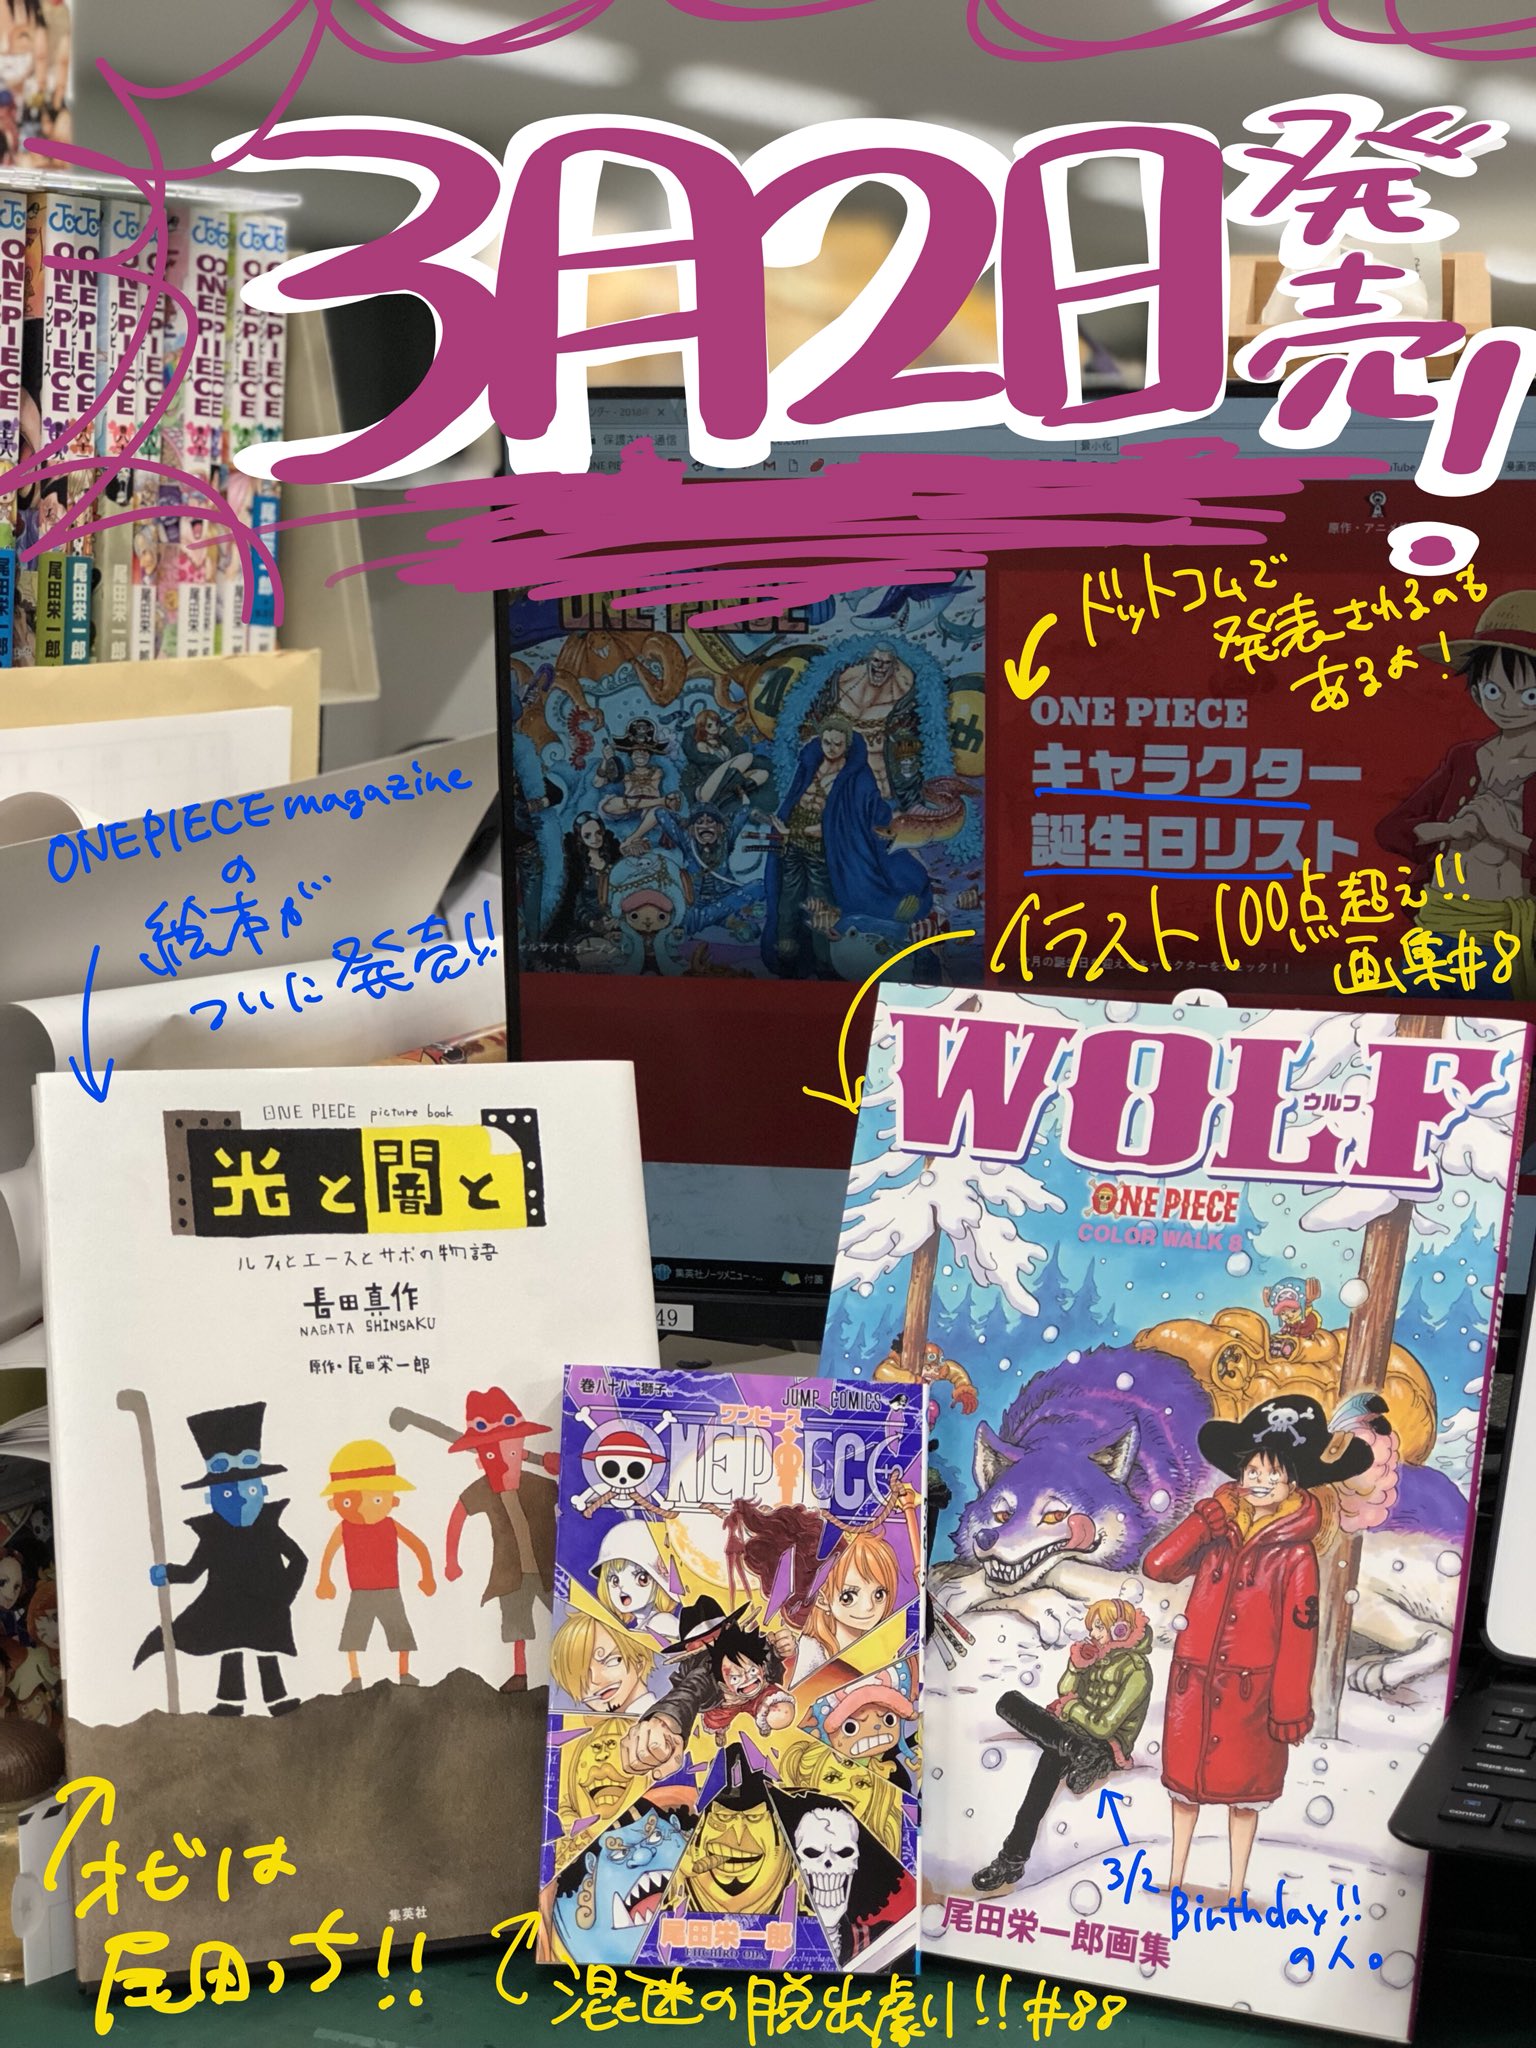 One Piece スタッフ 公式 Official みんな あしただよ One Piece 巻 カラーウォーク Wolf One Piece Picture Book T Co 4y78p3erah Twitter